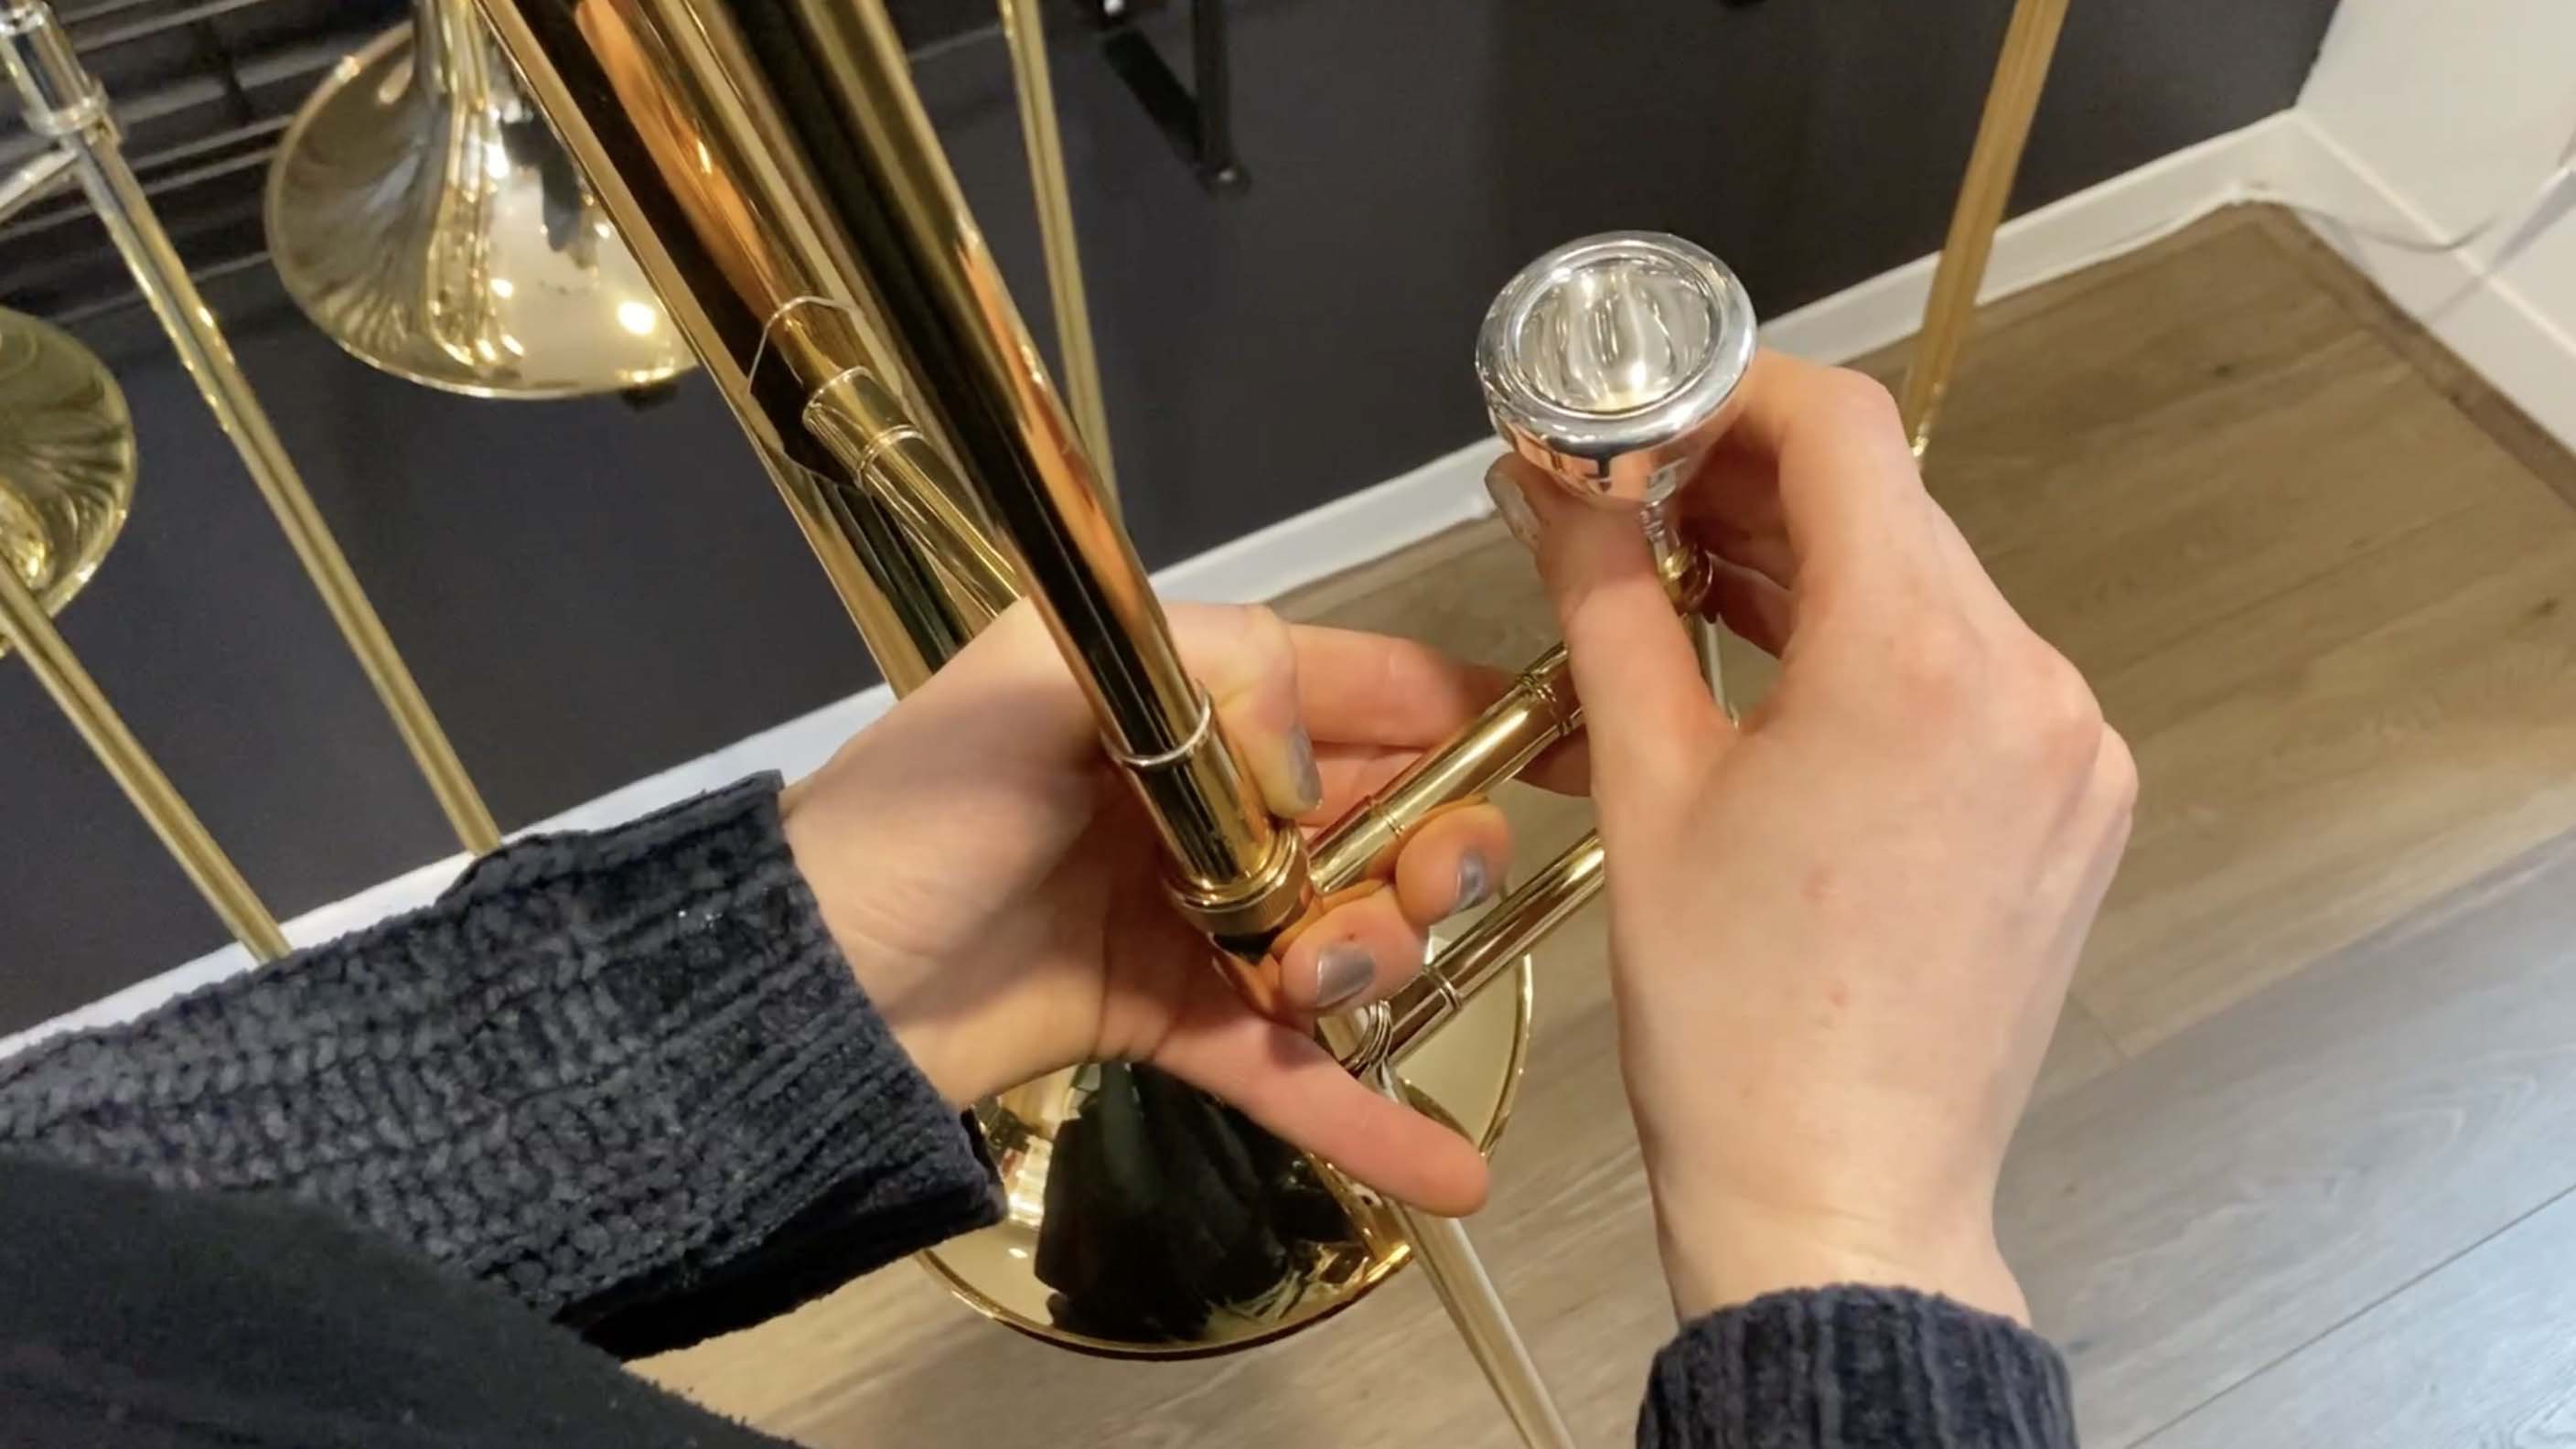 Trombone mouthpiece being inserted into the mouthpiece receiver.